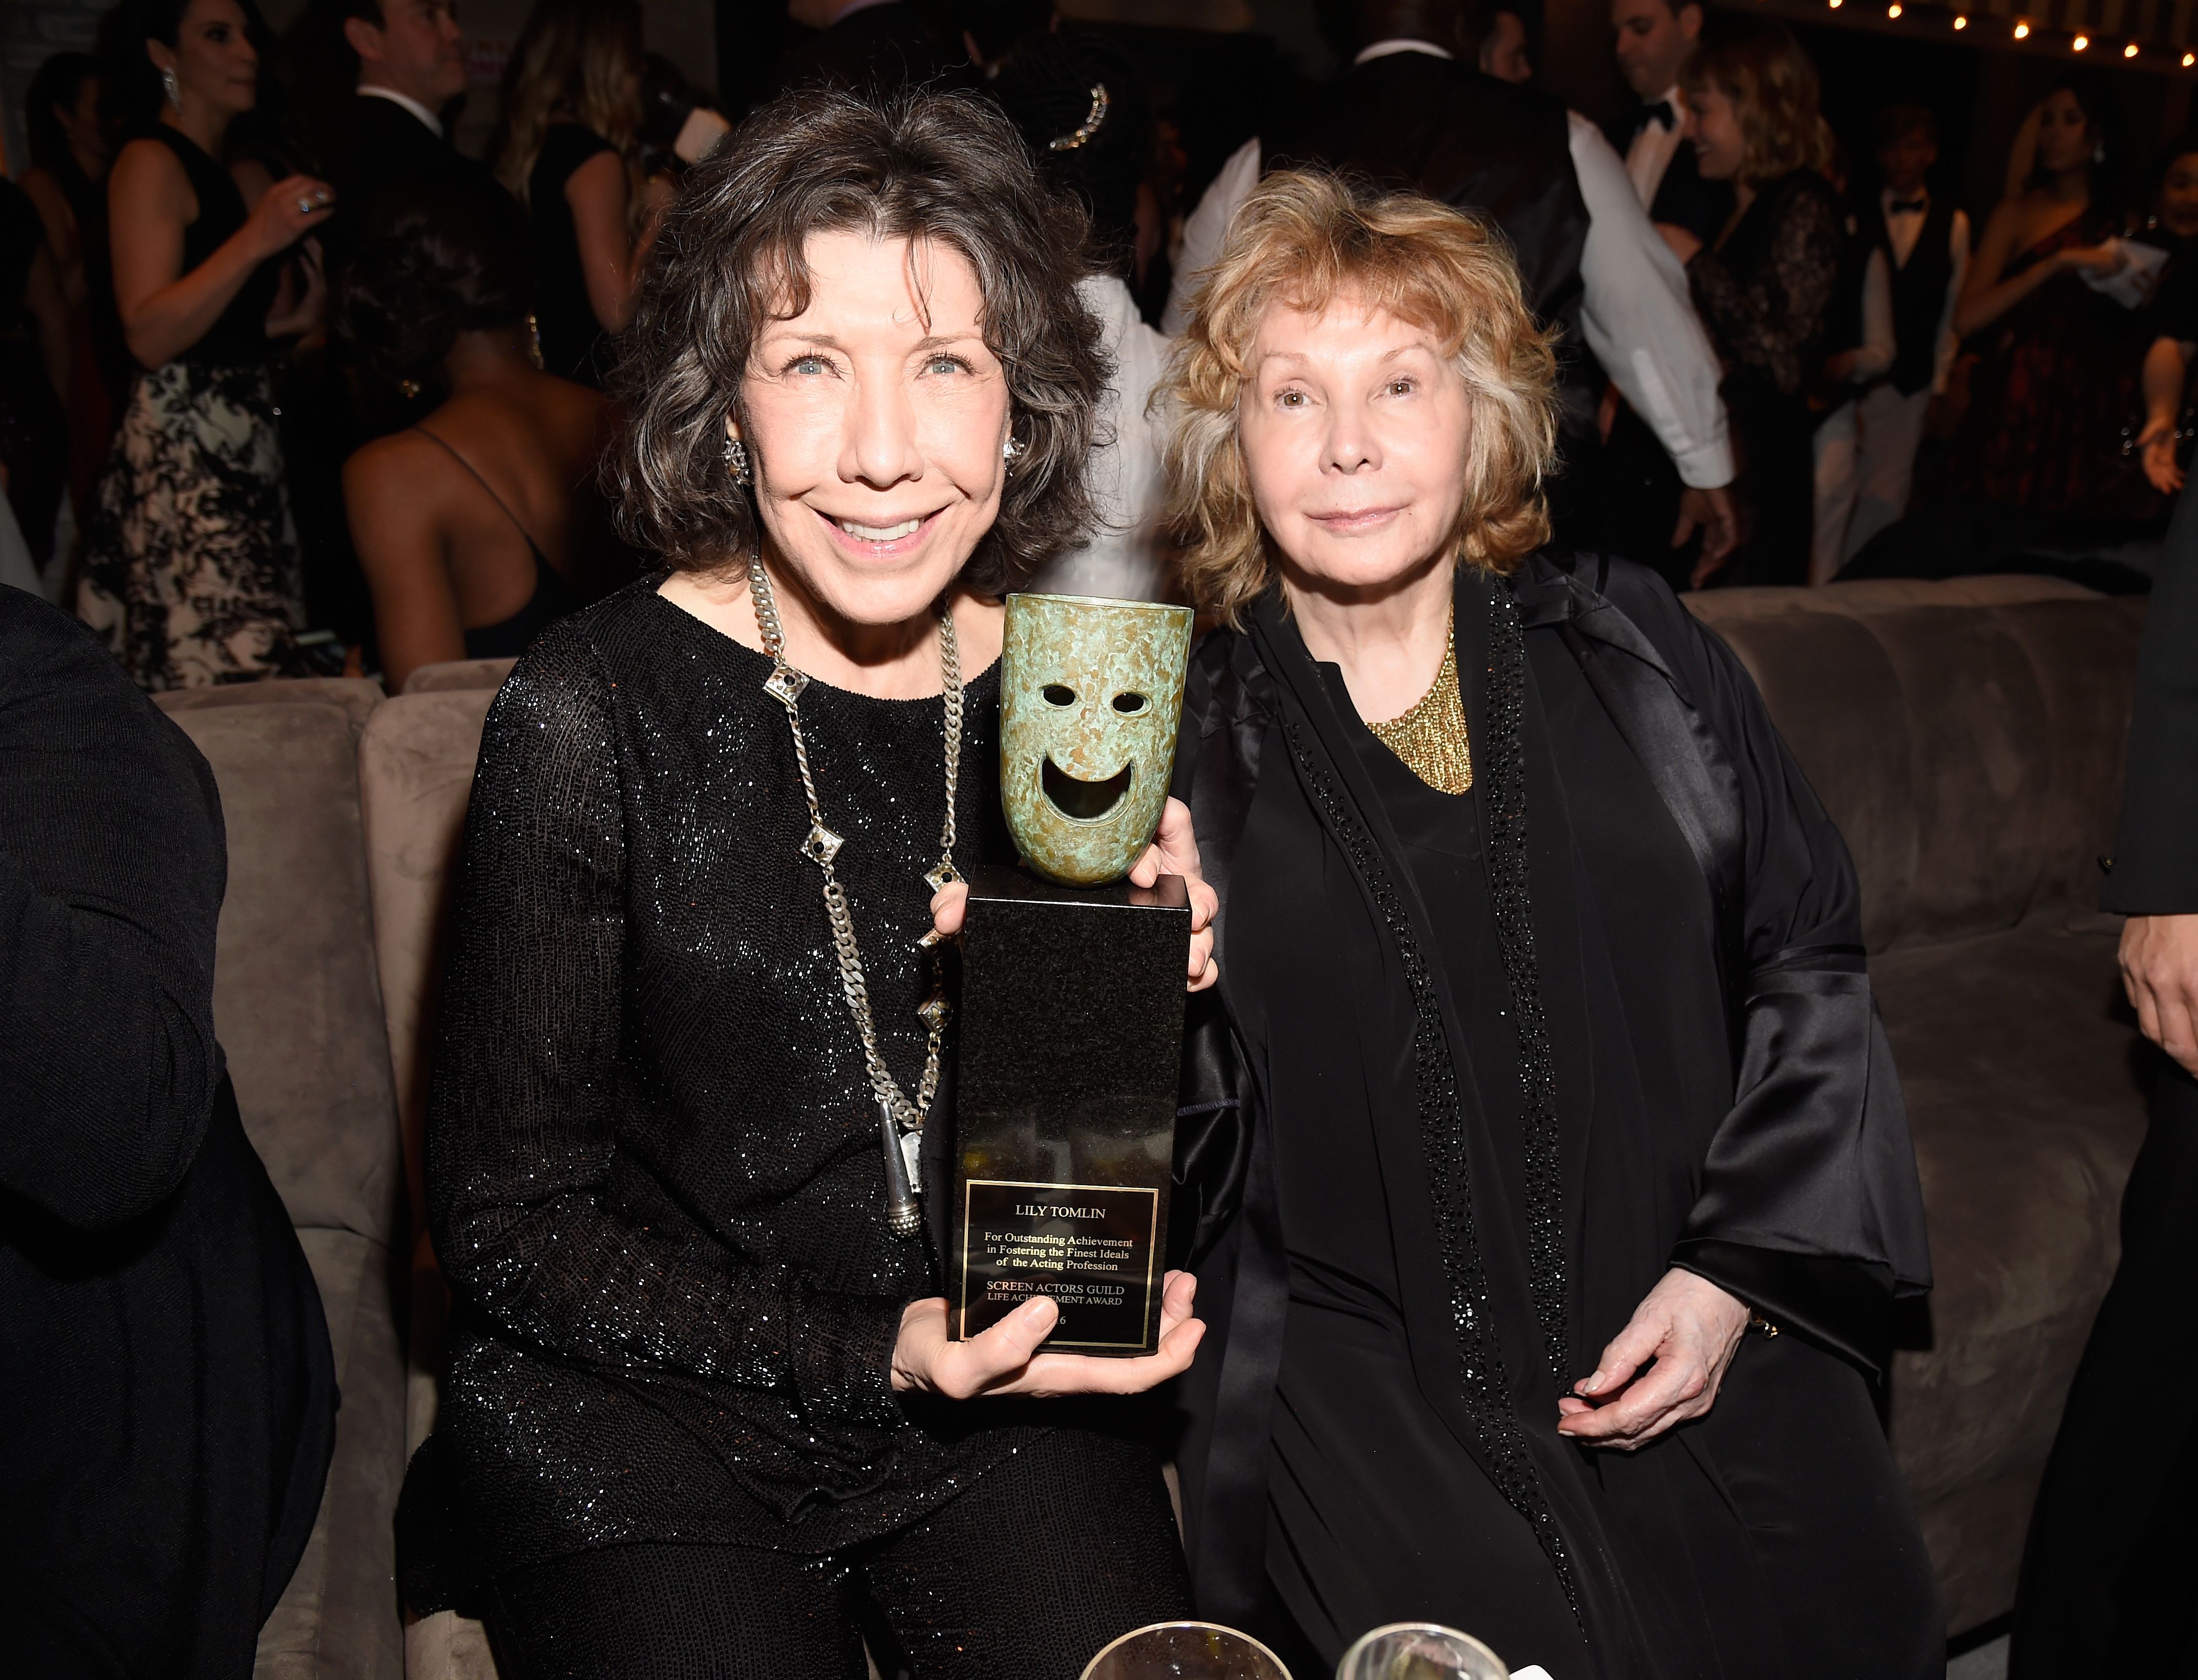 Lily Tomlin and Jane Wagner at People and EIF's Annual Screen Actors Guild Awards Gala on January 29, 2017, in Los Angeles, California. | Source: Kevin Mazur/Getty Images